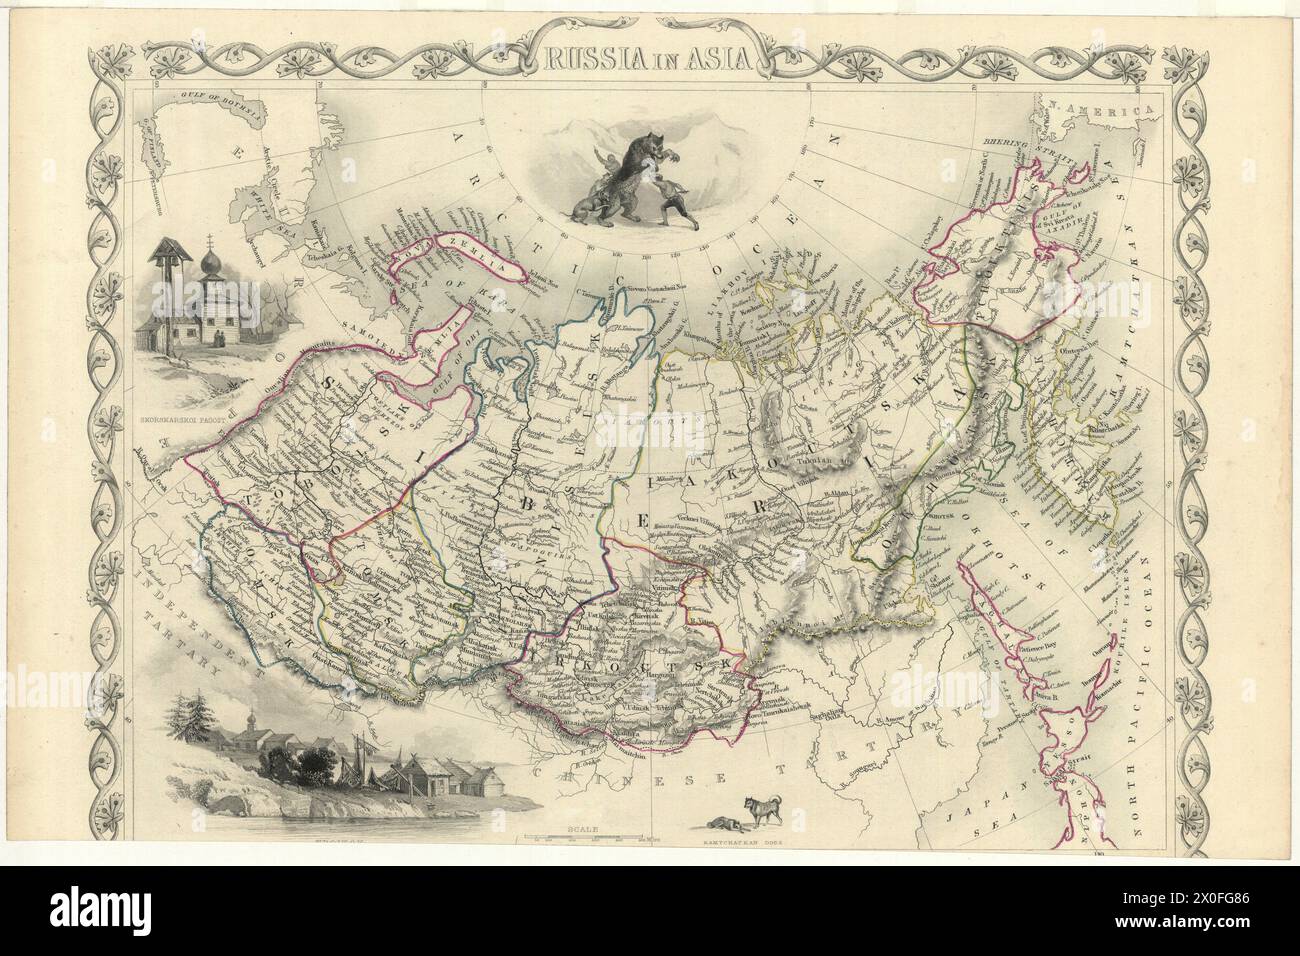 Vintage map titled Russia in Asia, London Printing and Publishing Company, post 1855 Stock Photo